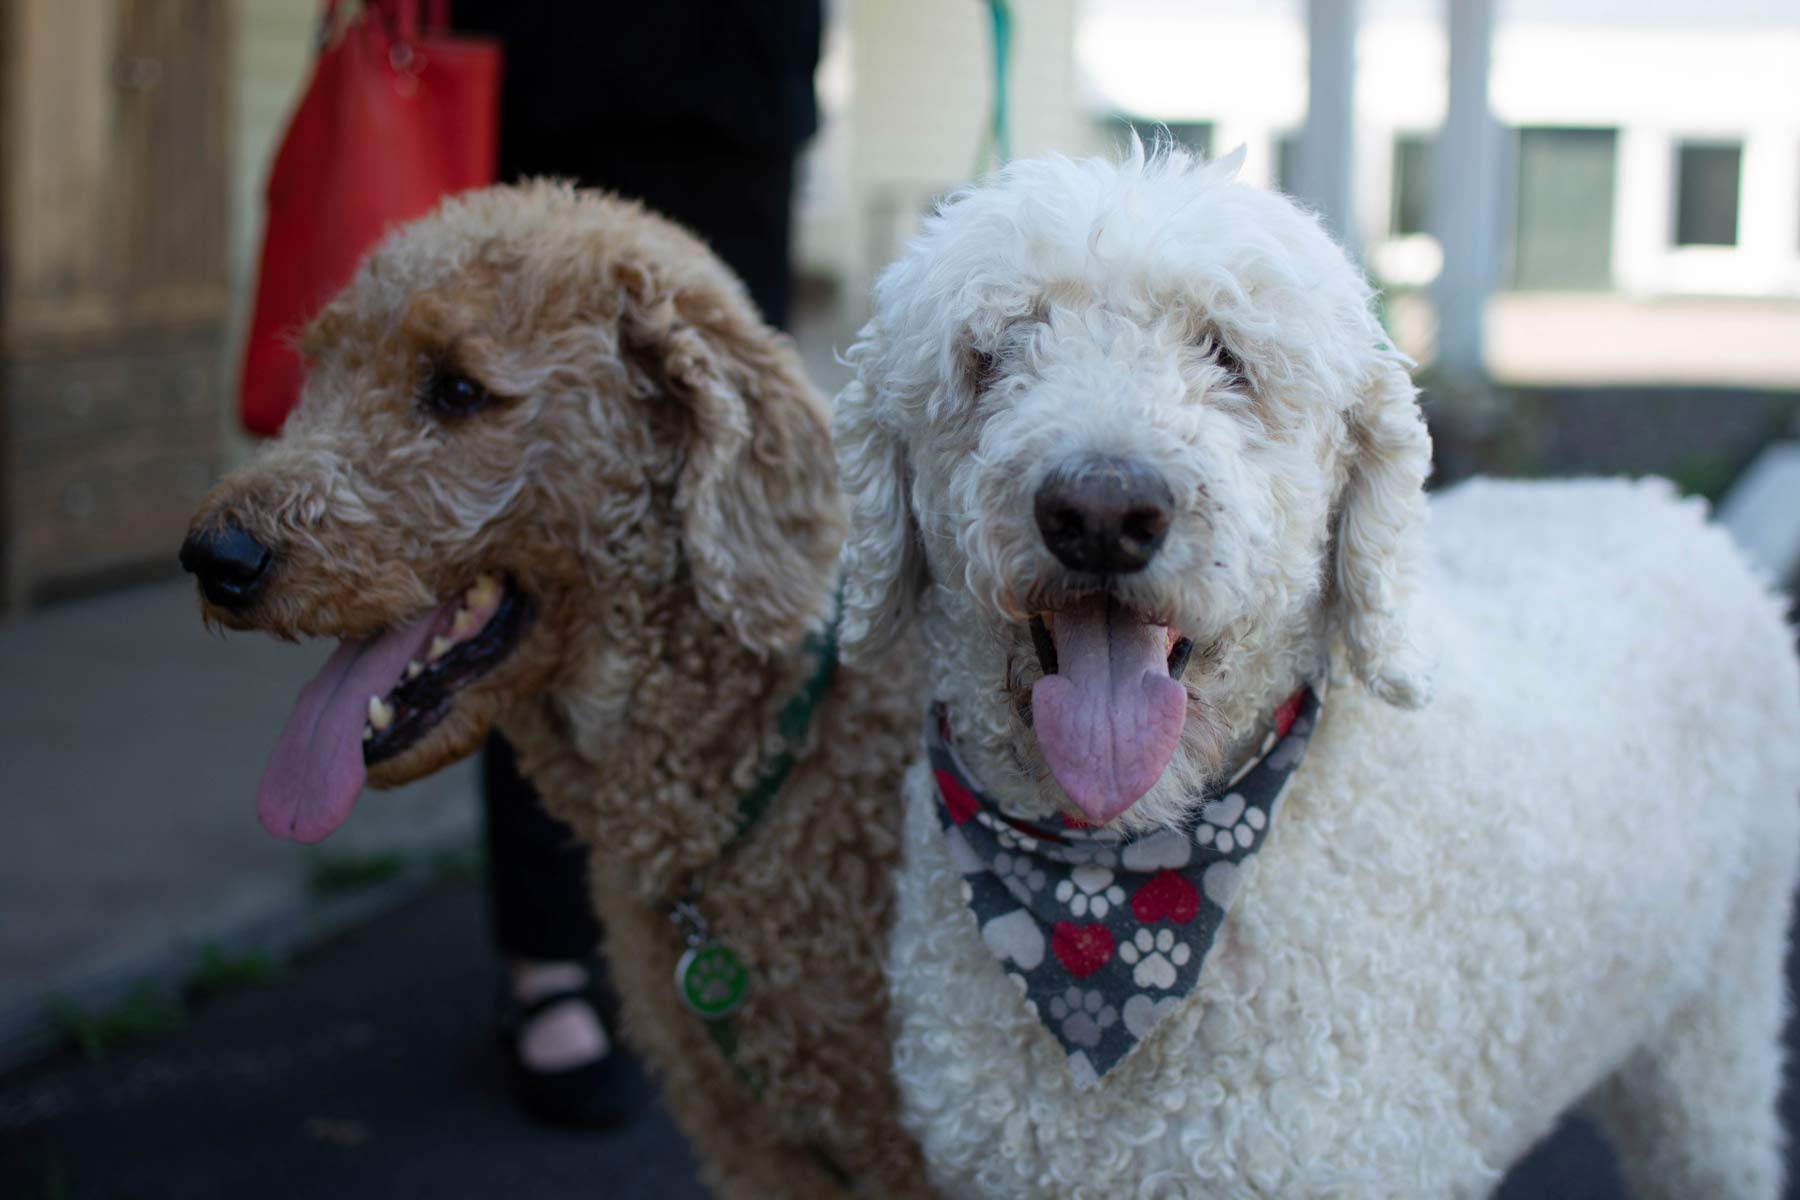 Poodles Owen and Finn panting on a warm day in the shade